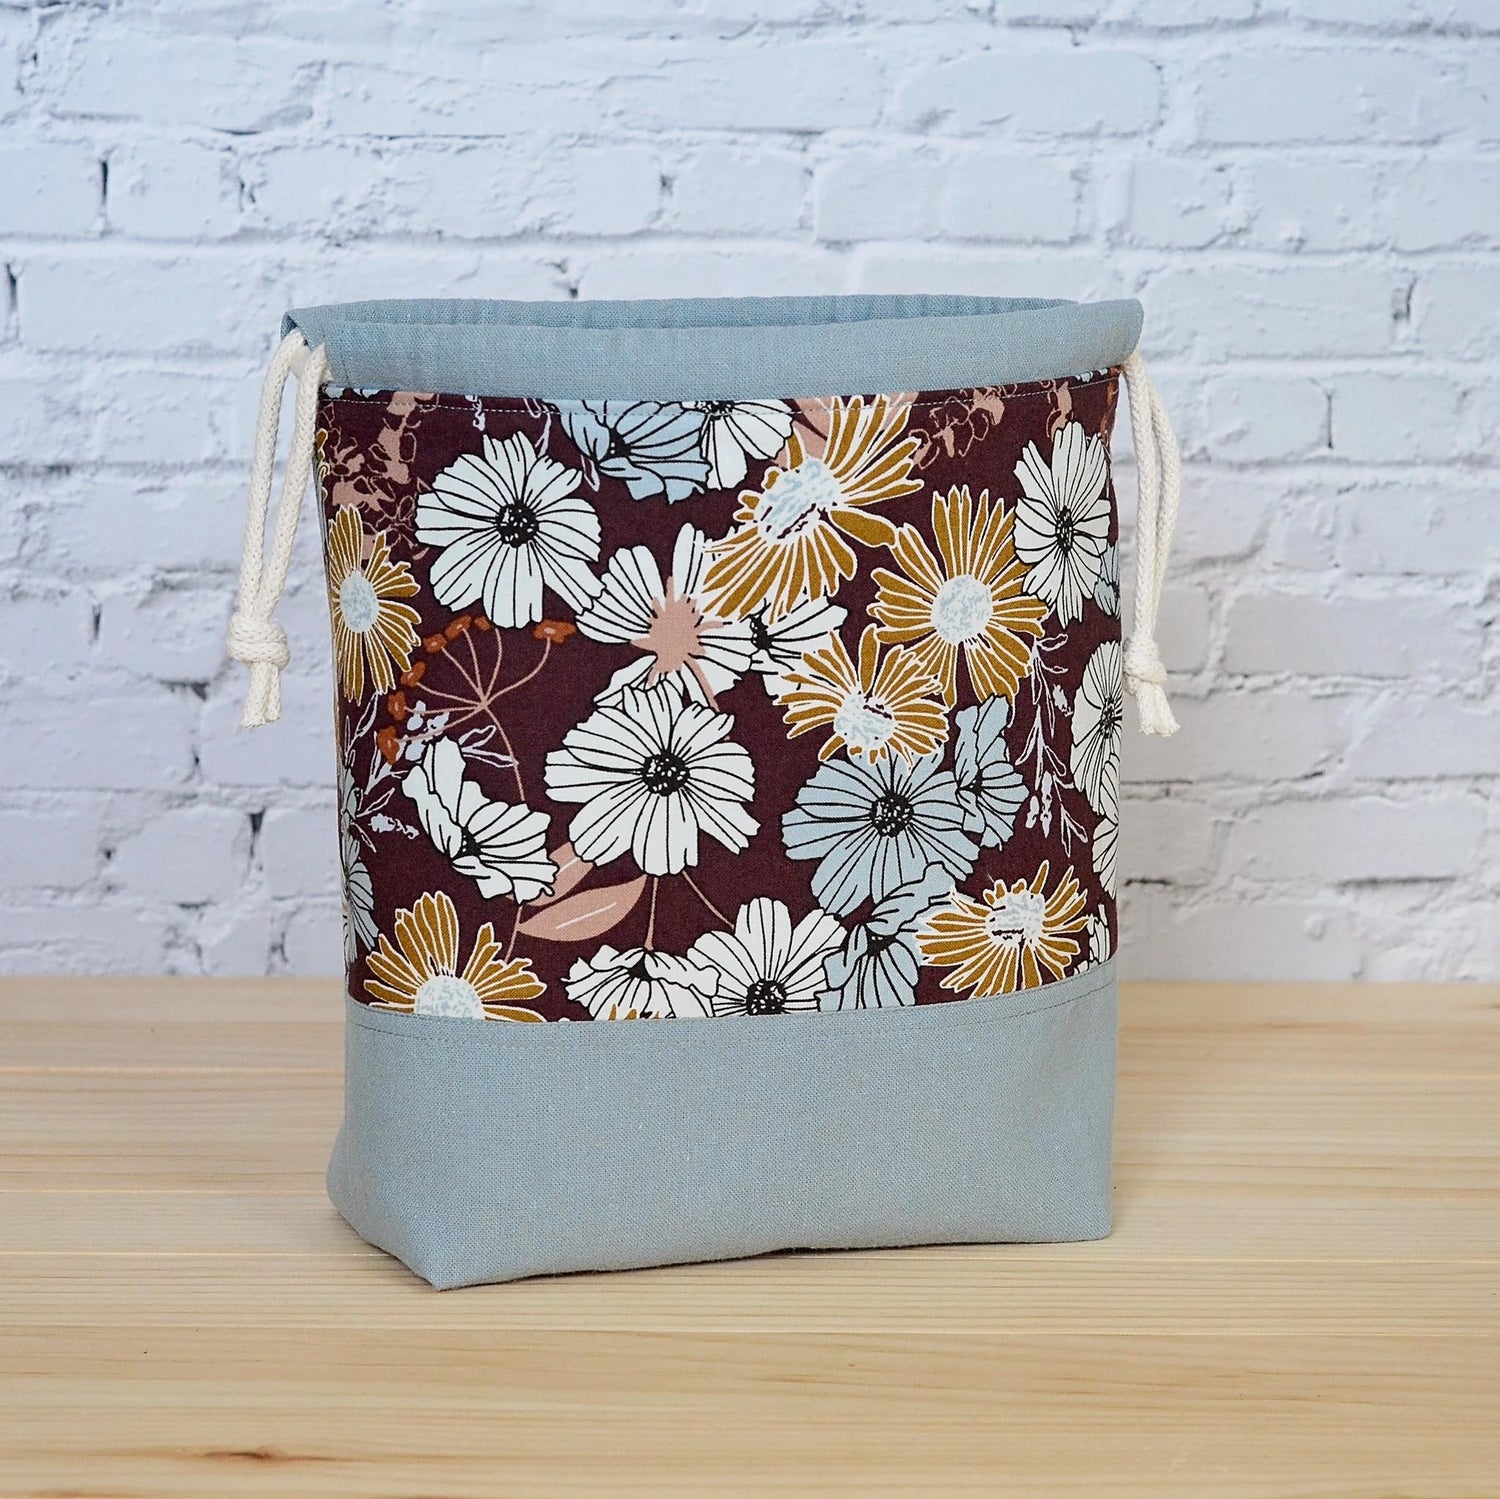 Small floral project bag for knitting or crochet in blues and browns.  Made in Nova Scotia, Canada.